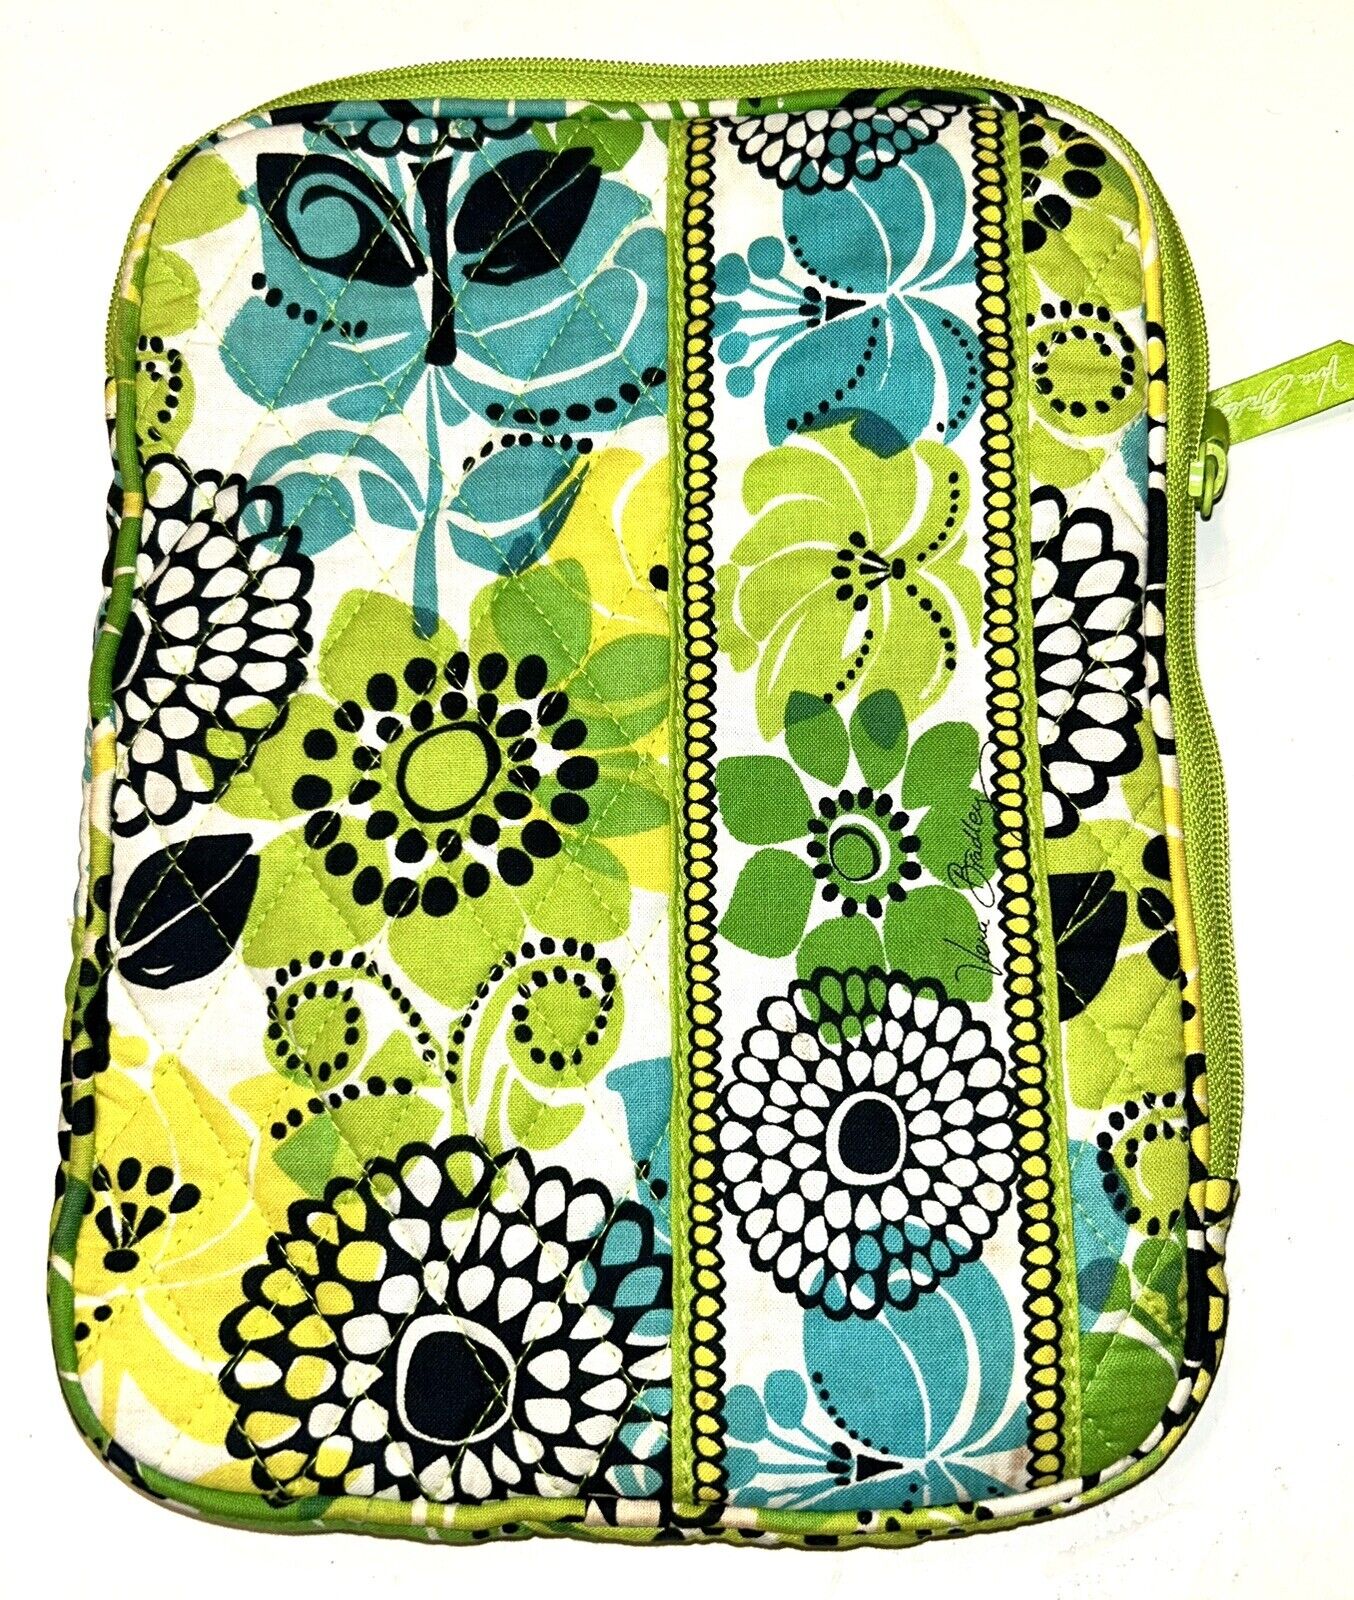 Vera Bradley Quilted Tablet Case Yellow Green Black Floral iPad Zip Travel Bag